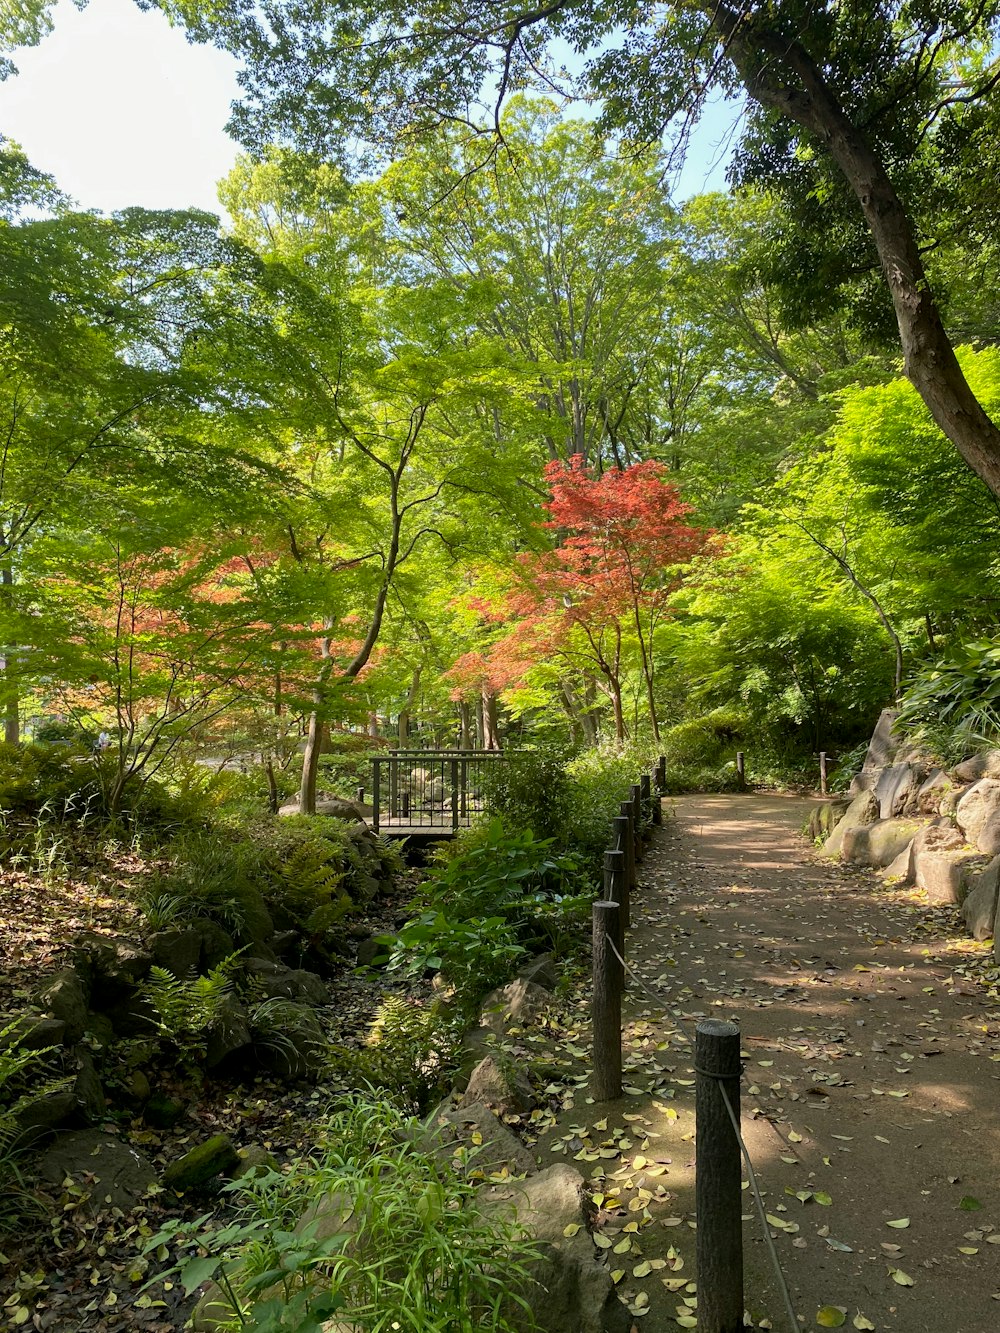 a path in a park with trees and rocks